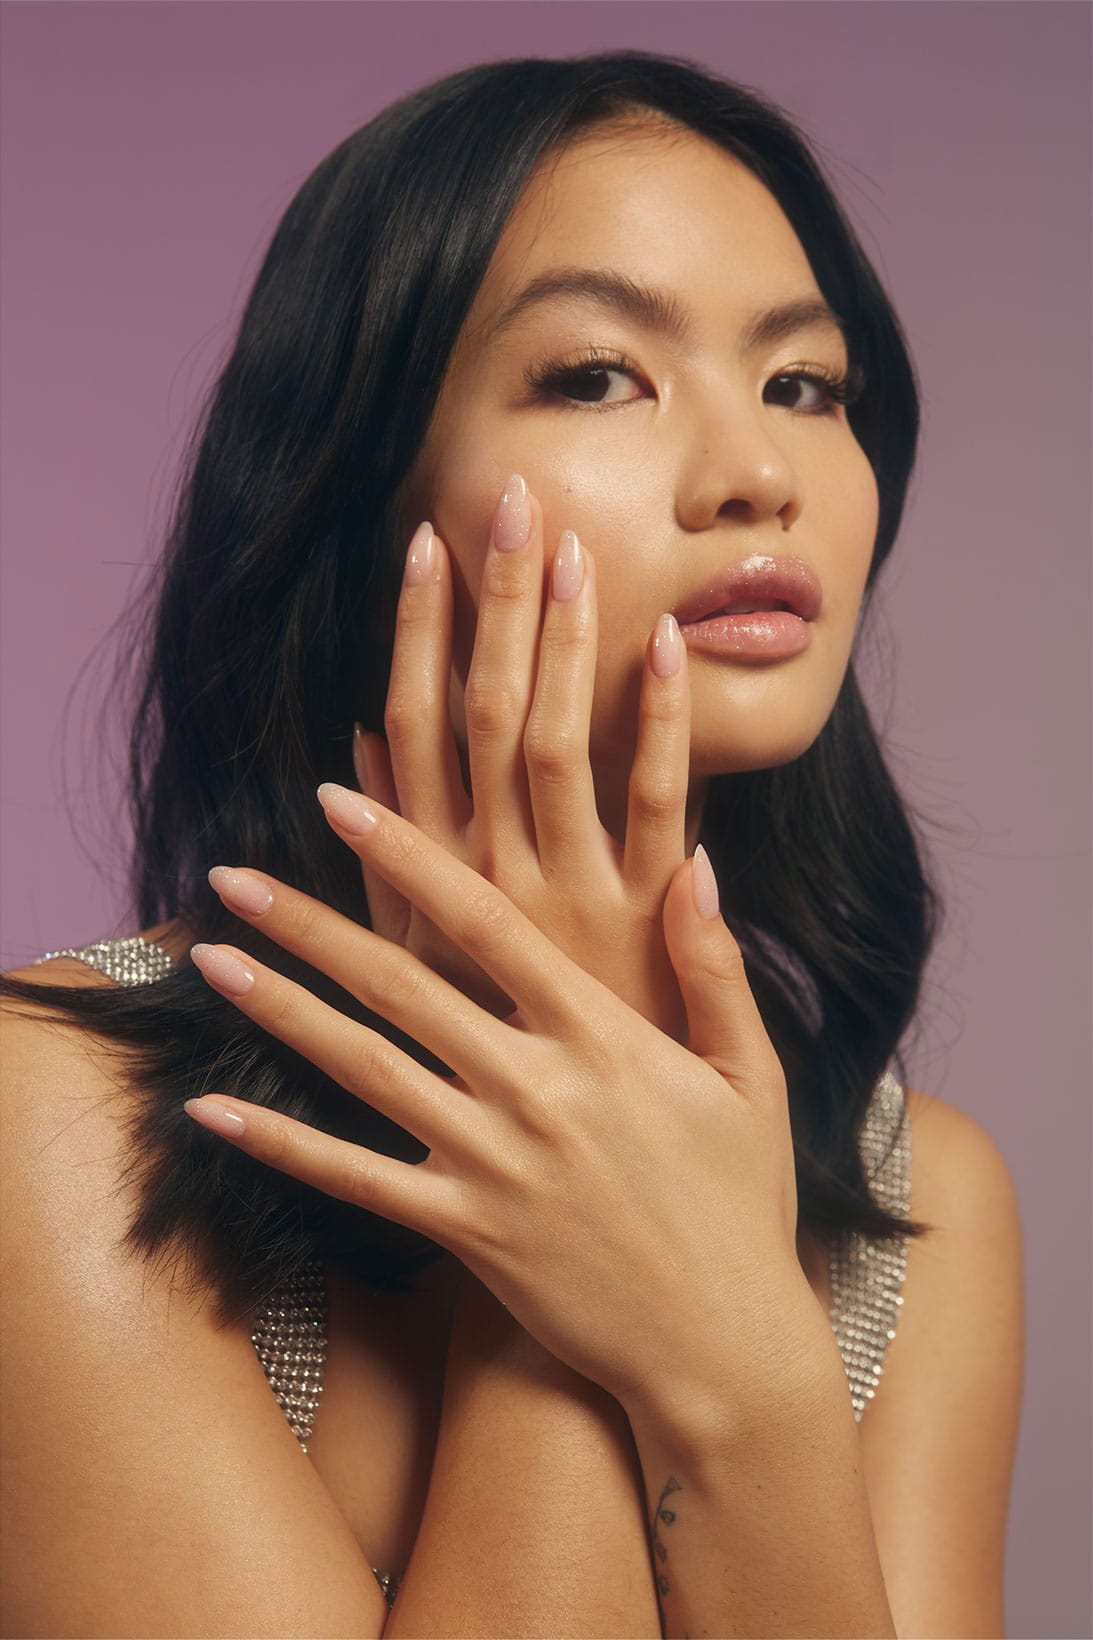 Try 30 Popular Summer Nail Colors for an Eye-Catching Mani